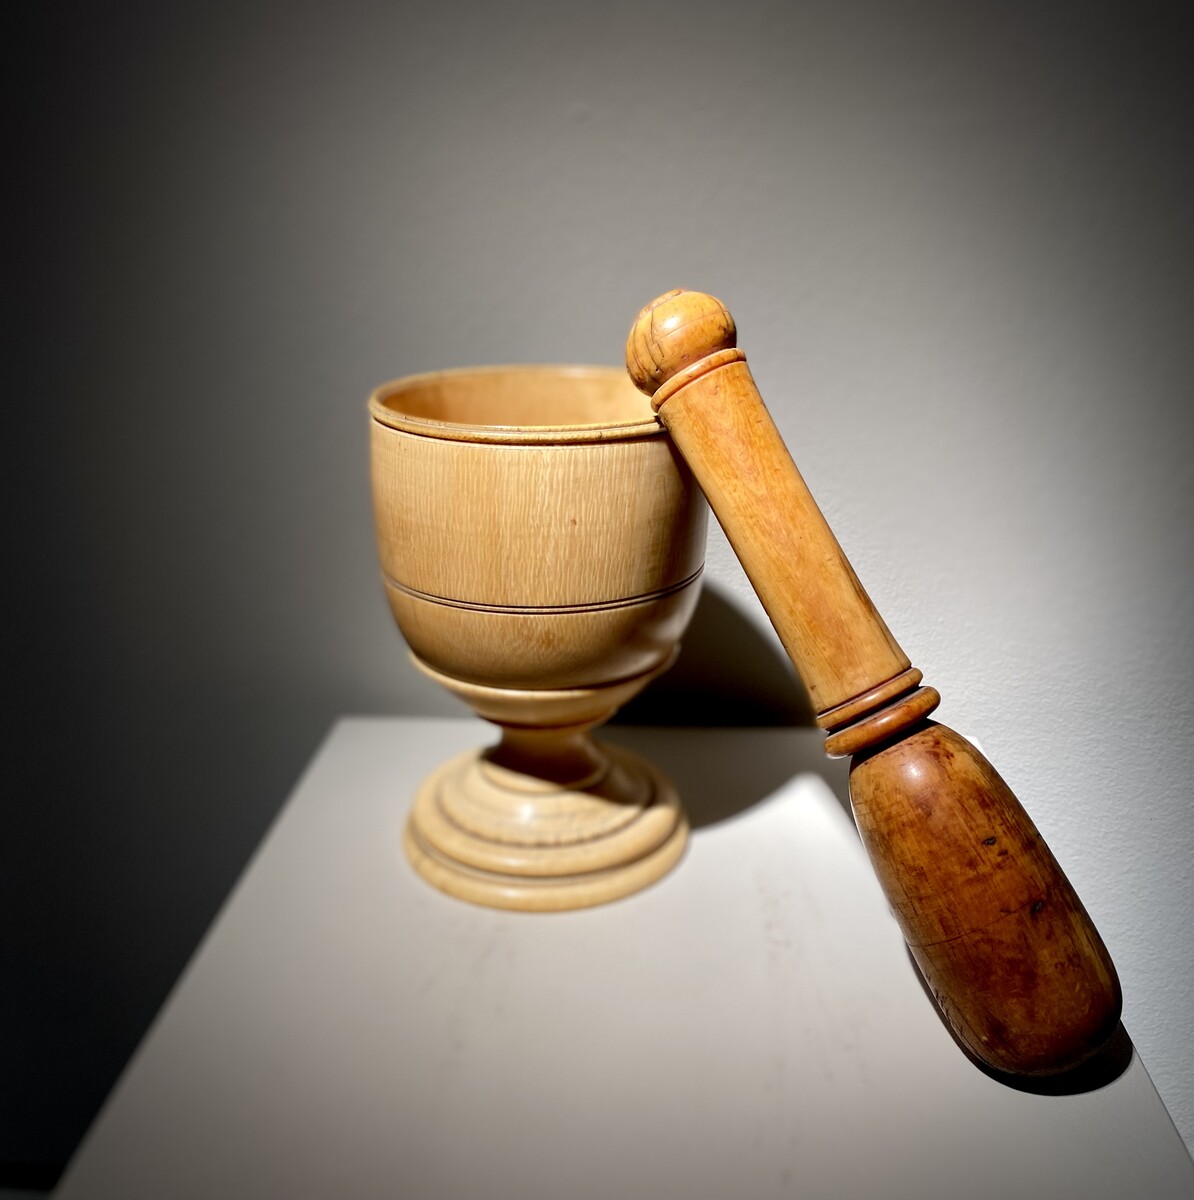 Fine 17th. century German turned ivory mortar with pestle